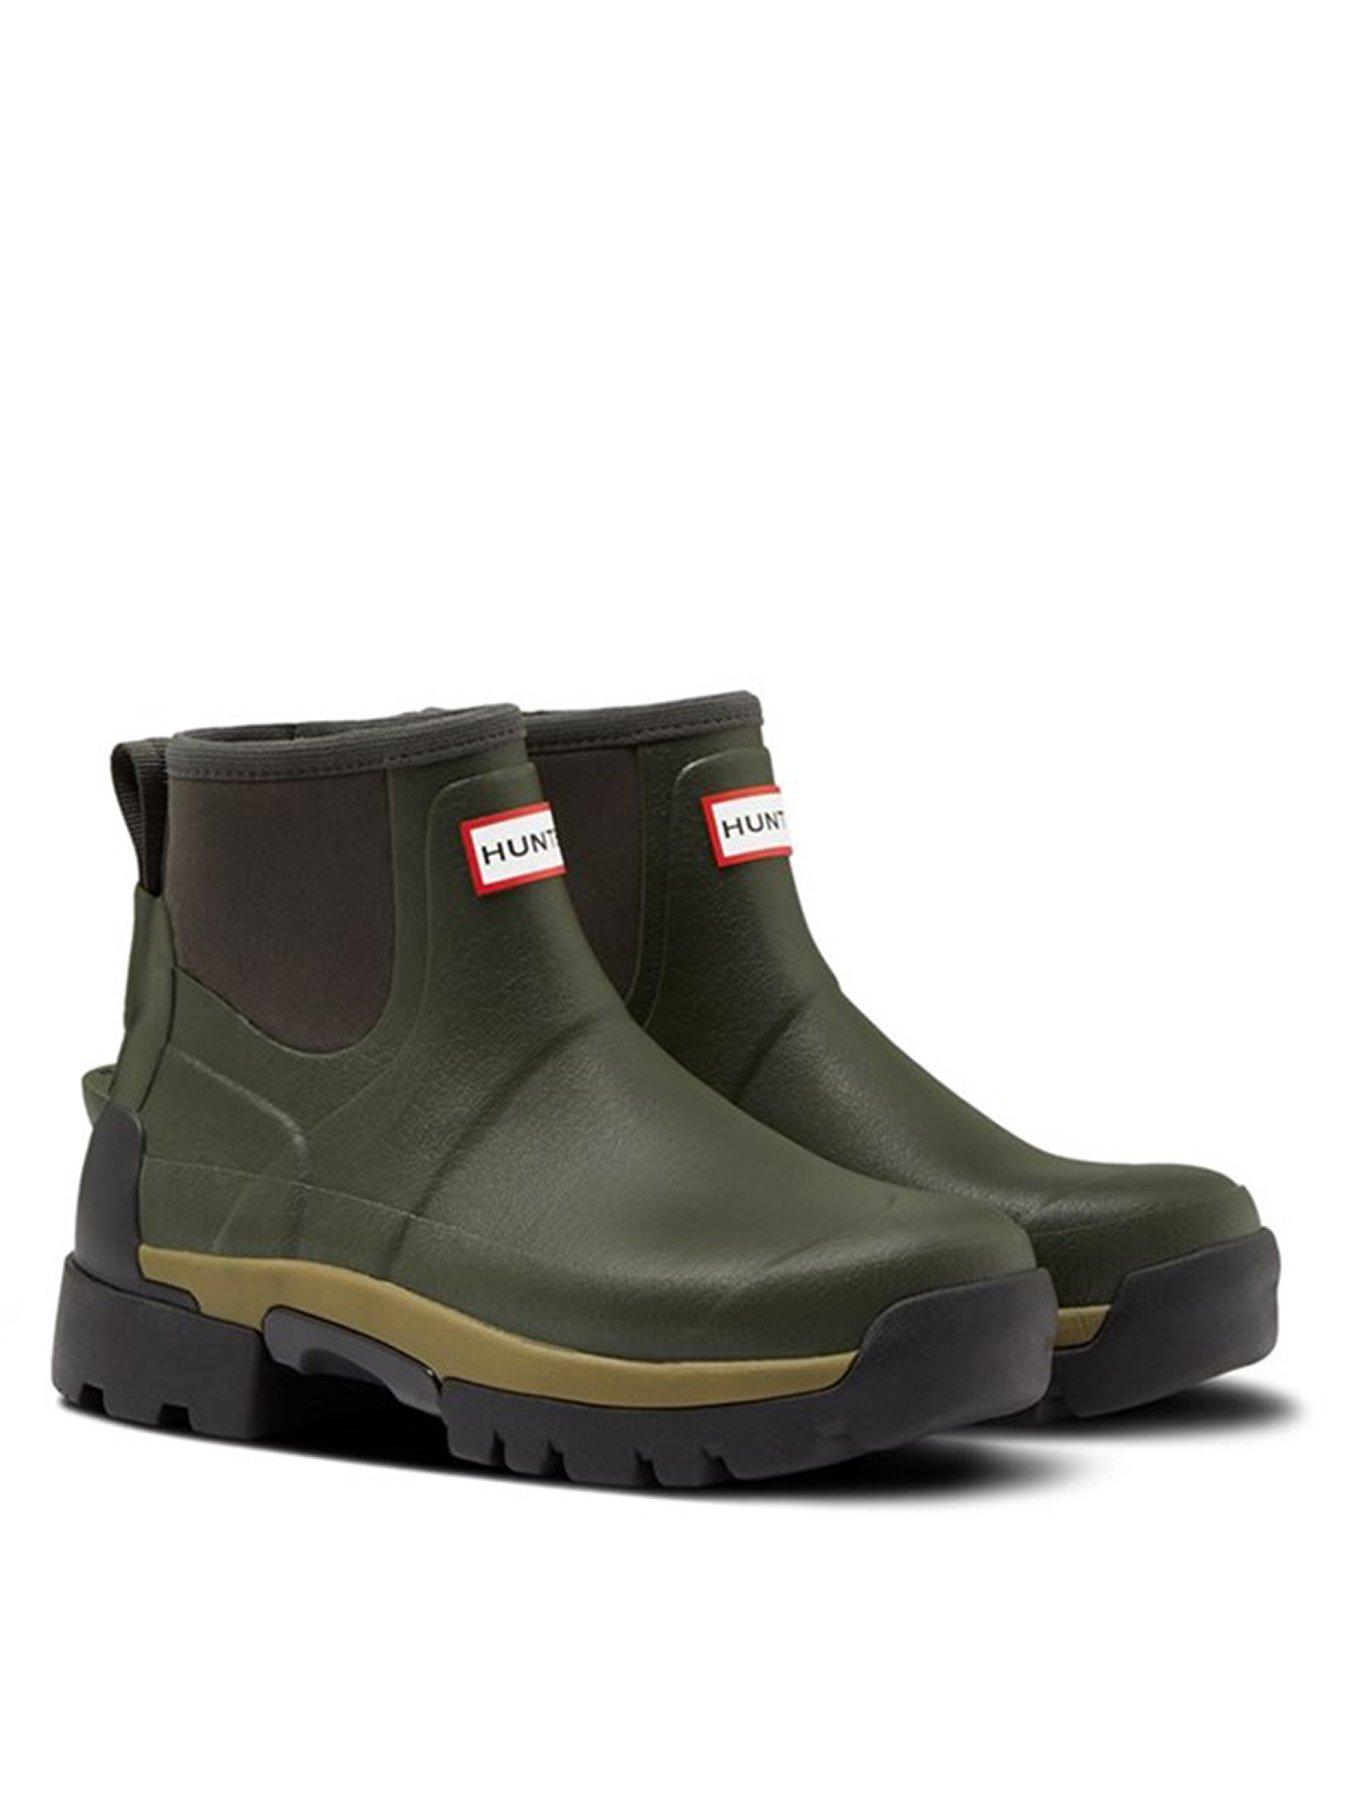 Shoes & boots Field Balmoral Hybrid Short Wellington Boots - Olive